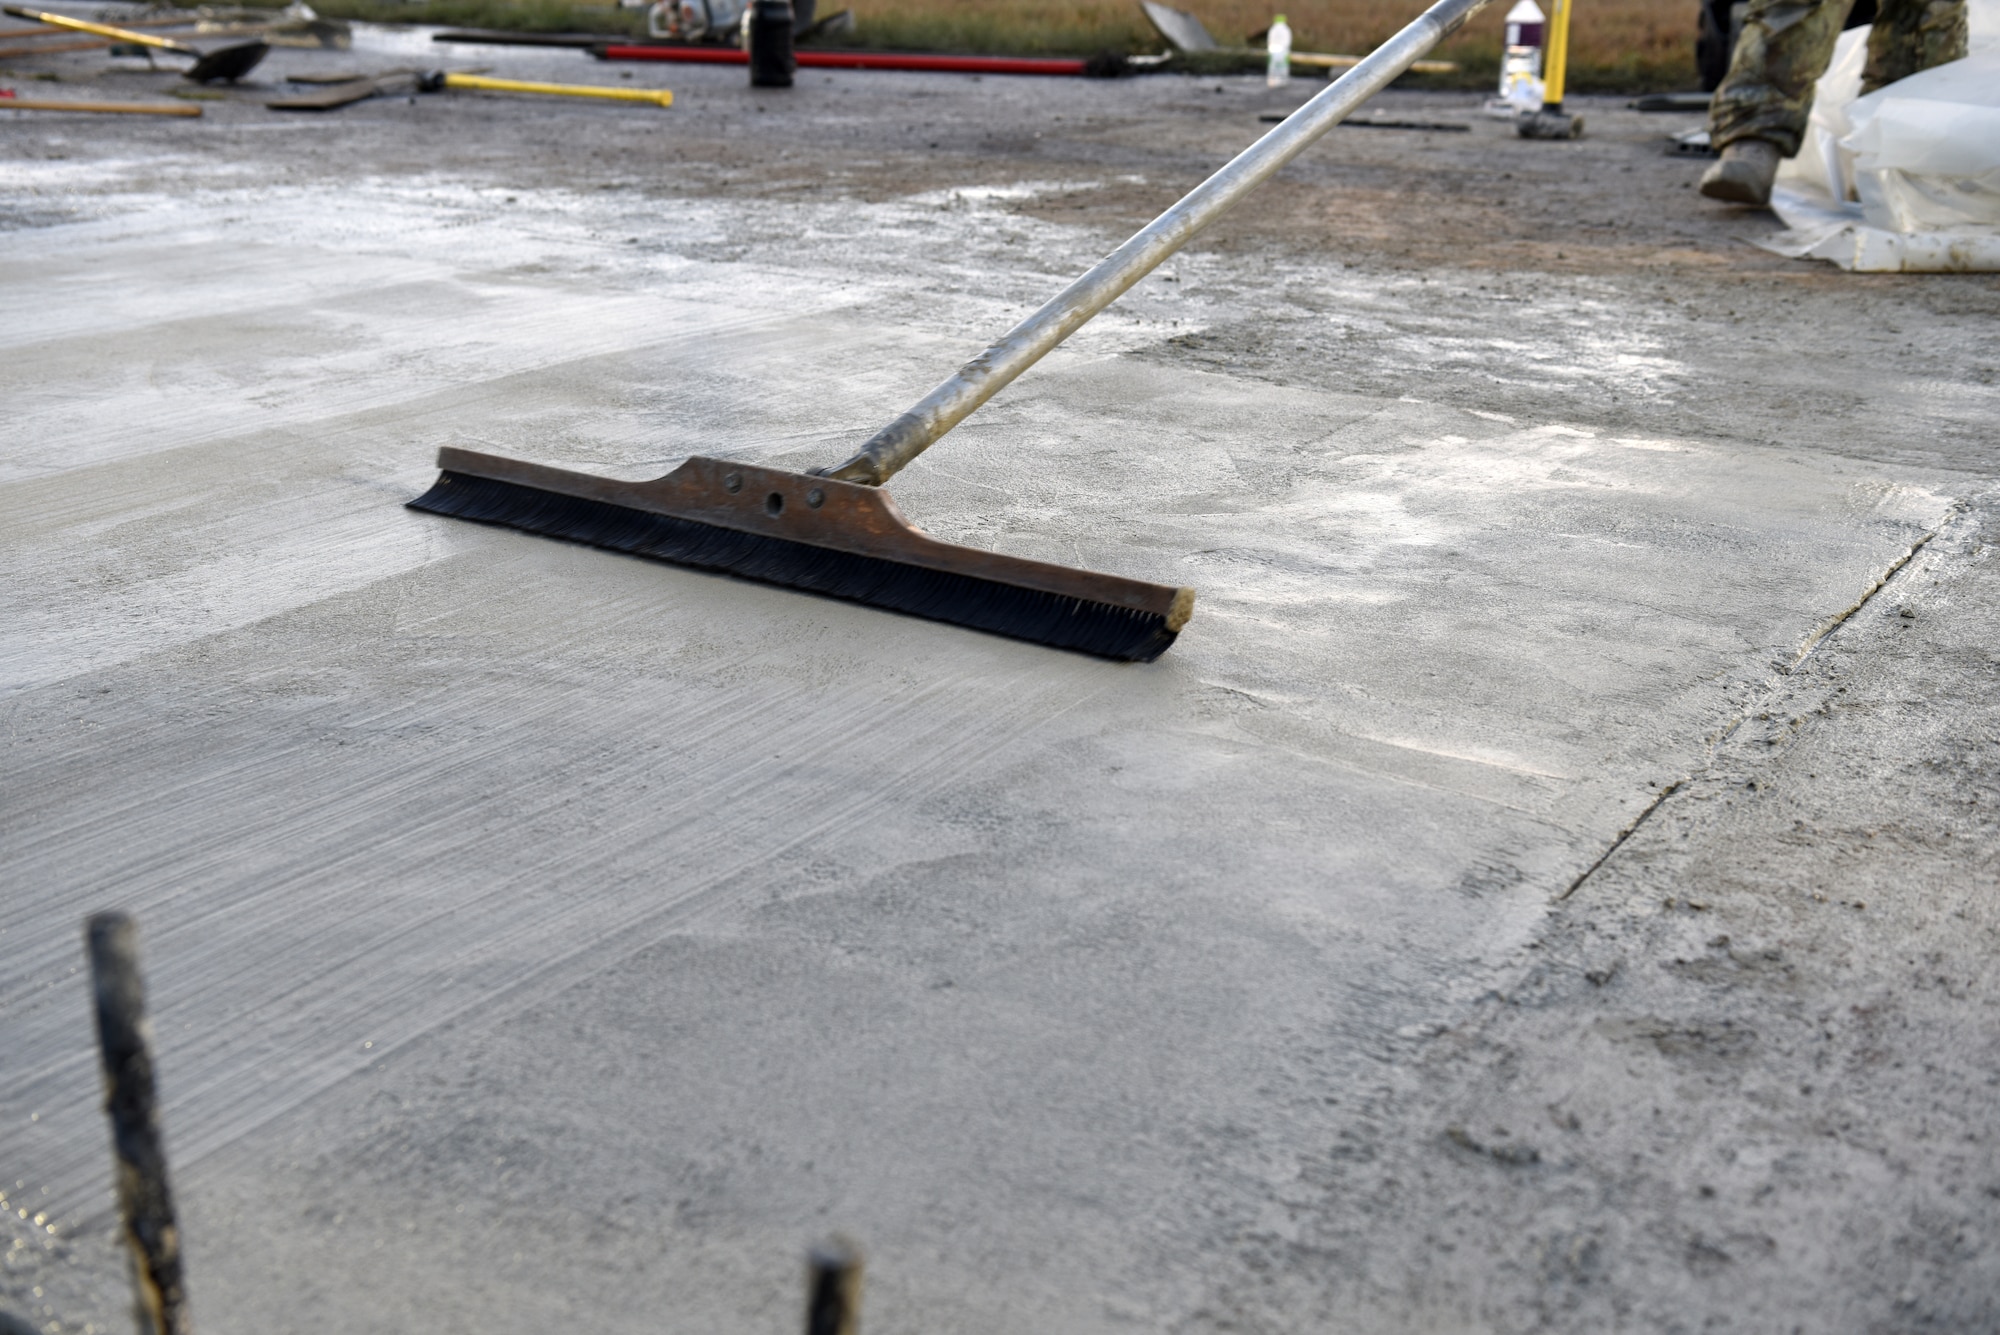 A U.S. Air Force 8th Civil Engineer Squadron member sweeps wet concrete on the flight line at Kunsan Air Base, Republic of Korea, May 2, 2019. The 8th Civil Engineer Squadron and 8th Logistics Readiness Squadron made the flight line operational again just 24 hours after it was shut down to repair a sinkhole. (U.S. Air Force photo by Staff Sgt. Joshua Edwards)